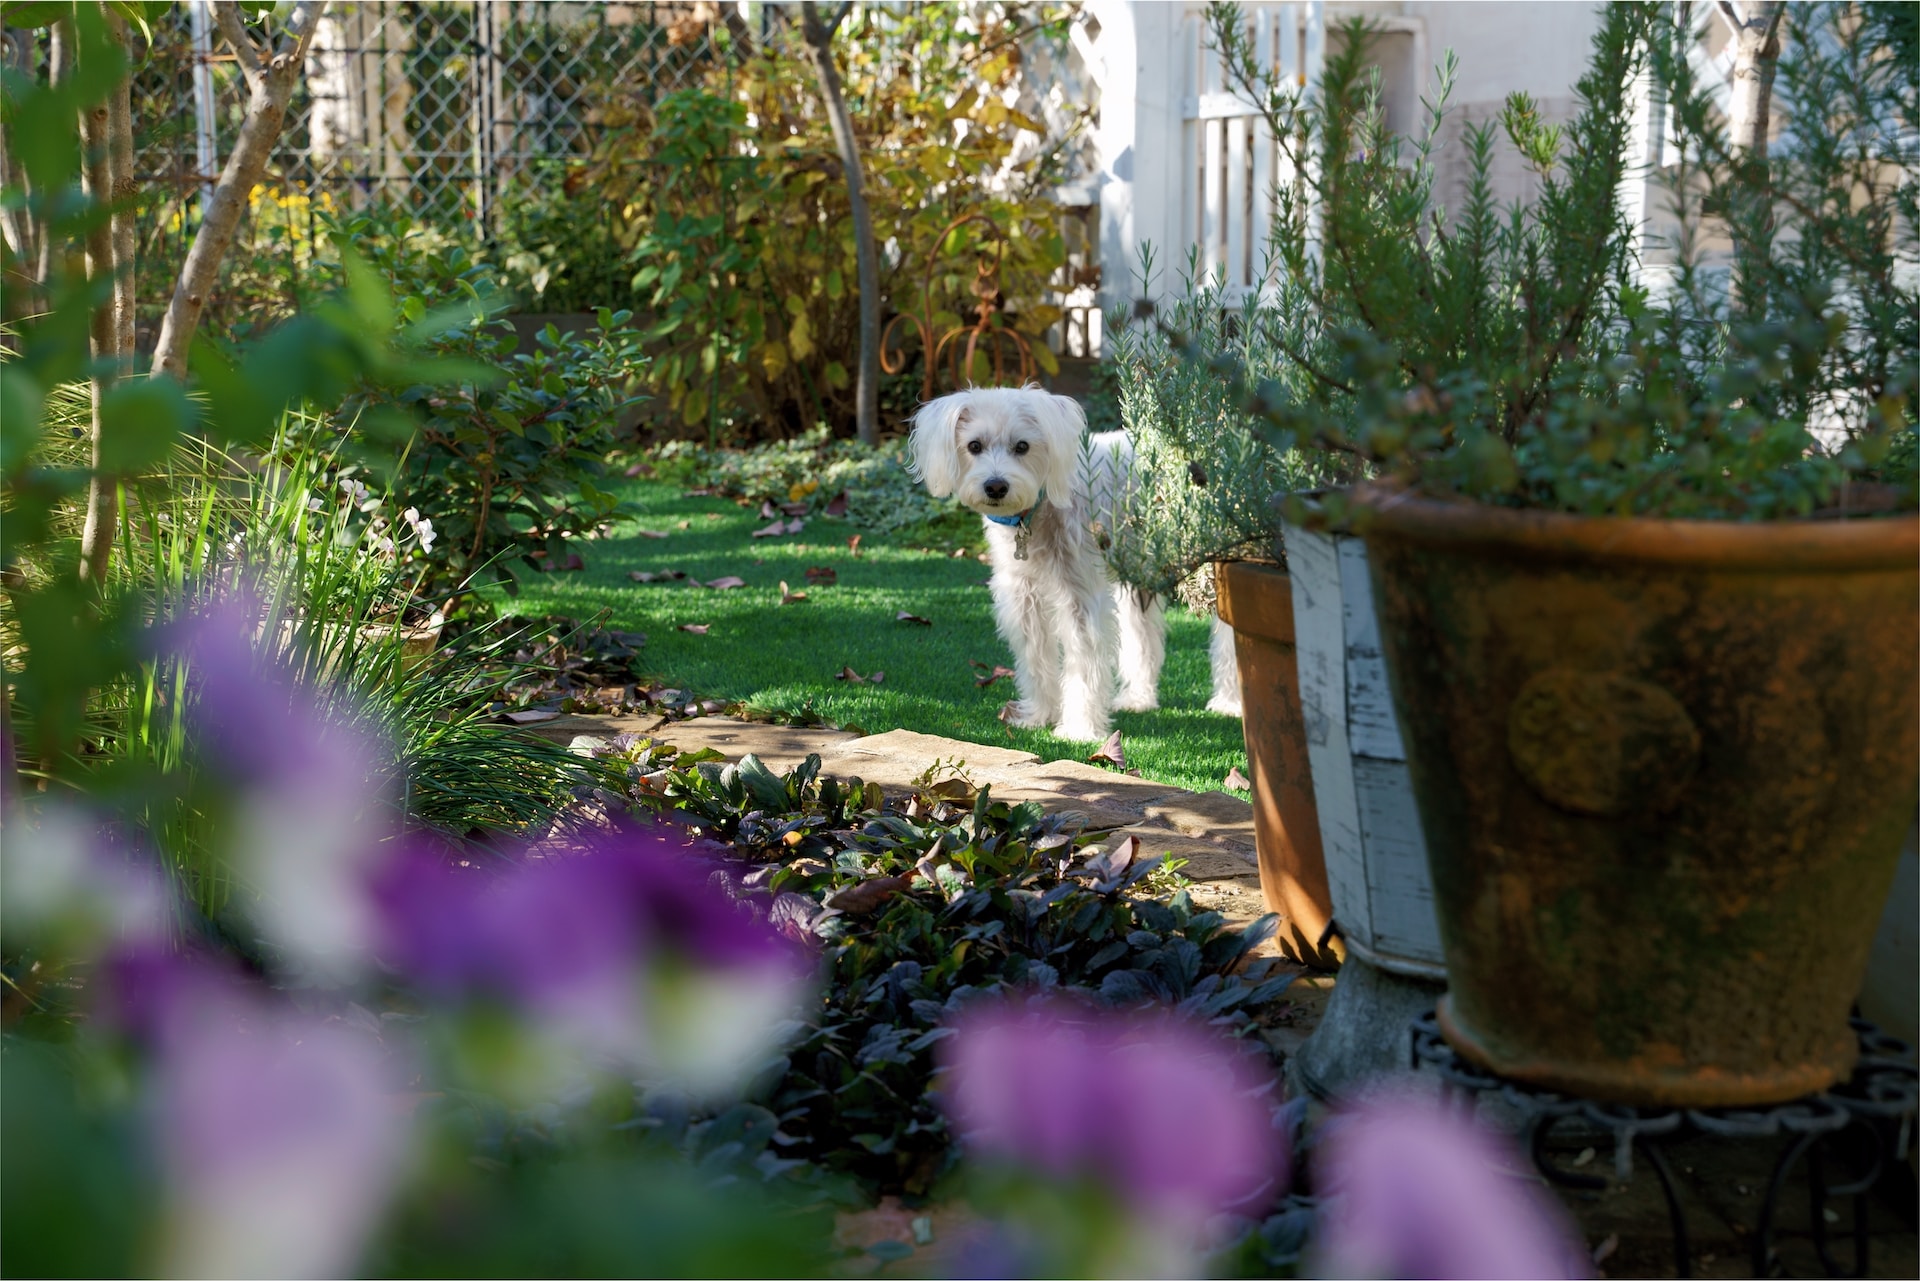 A small white dog exploring a garden full of flowers